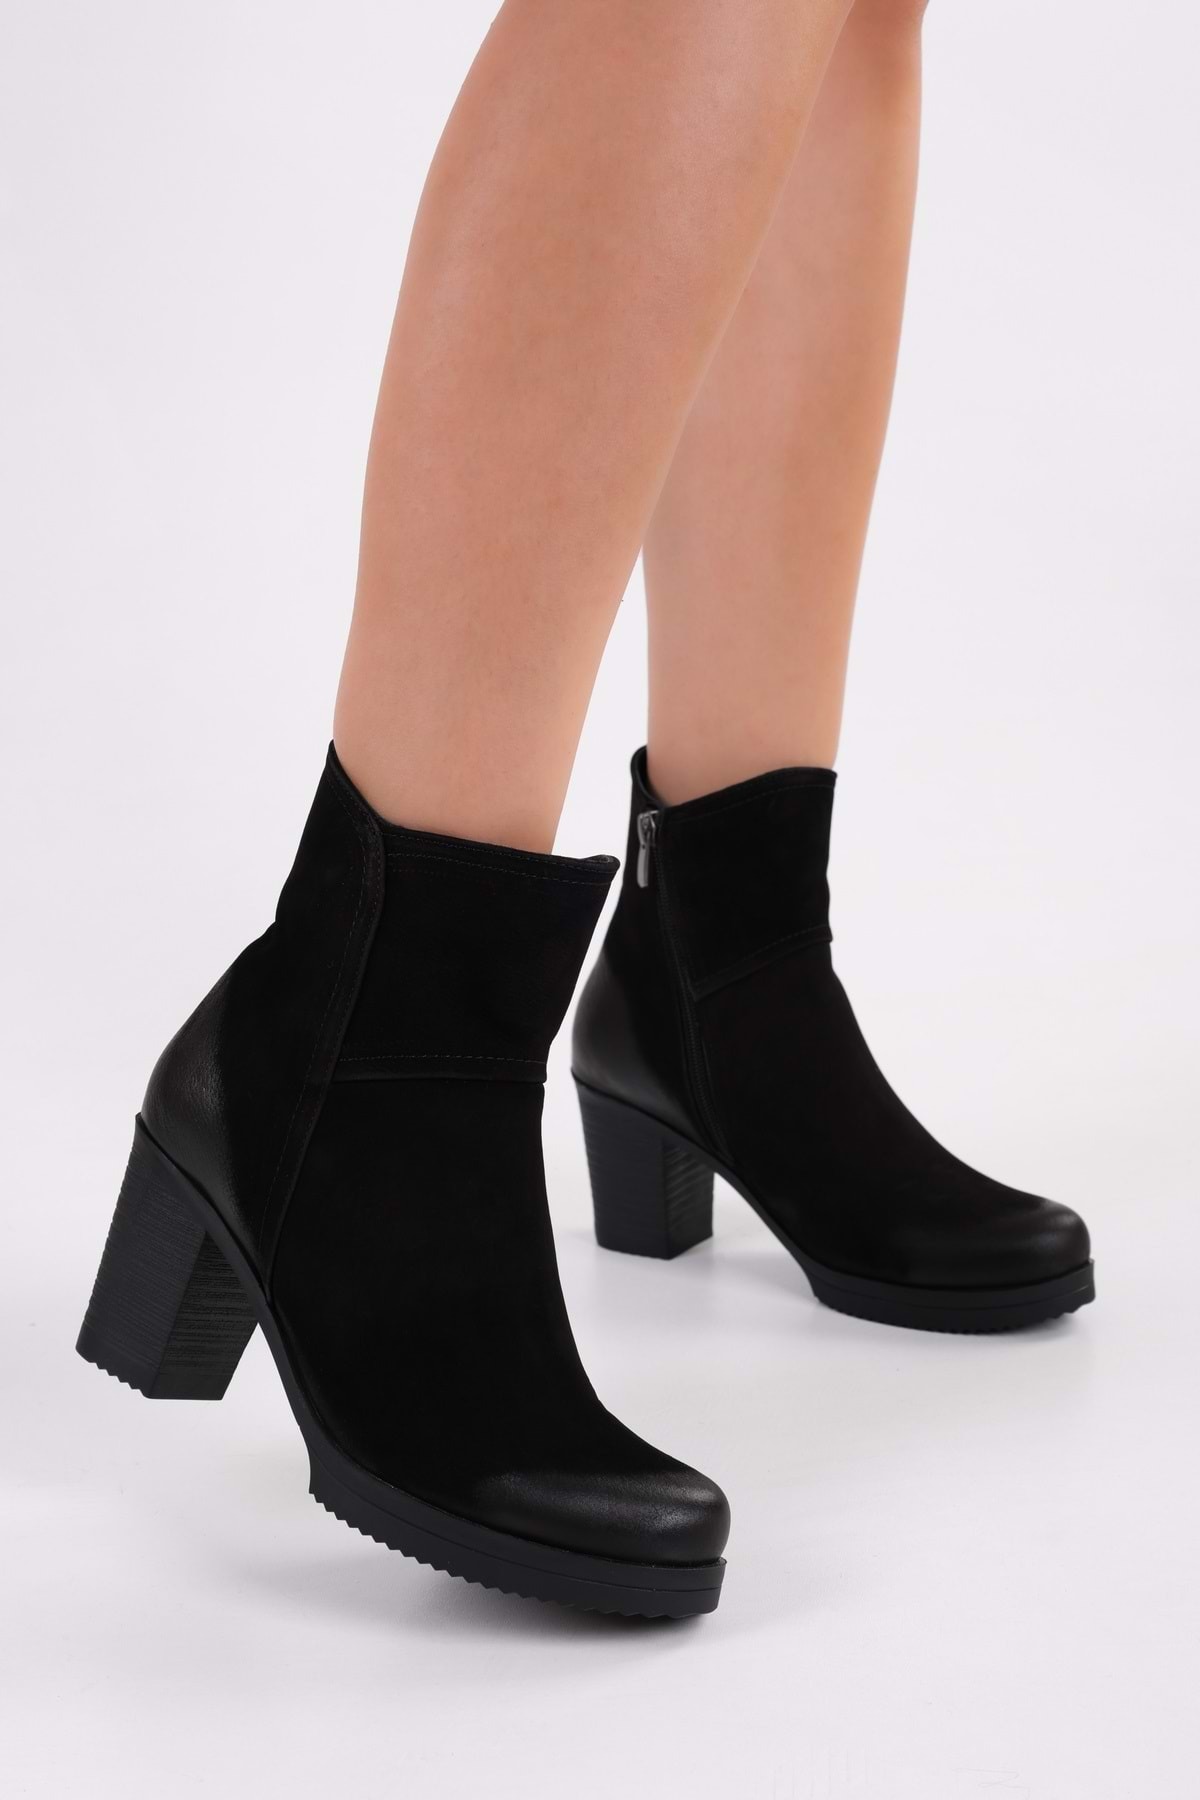 Levně Shoeberry Women's Hero Black Genuine Suede Leather Daily Heeled Boots.